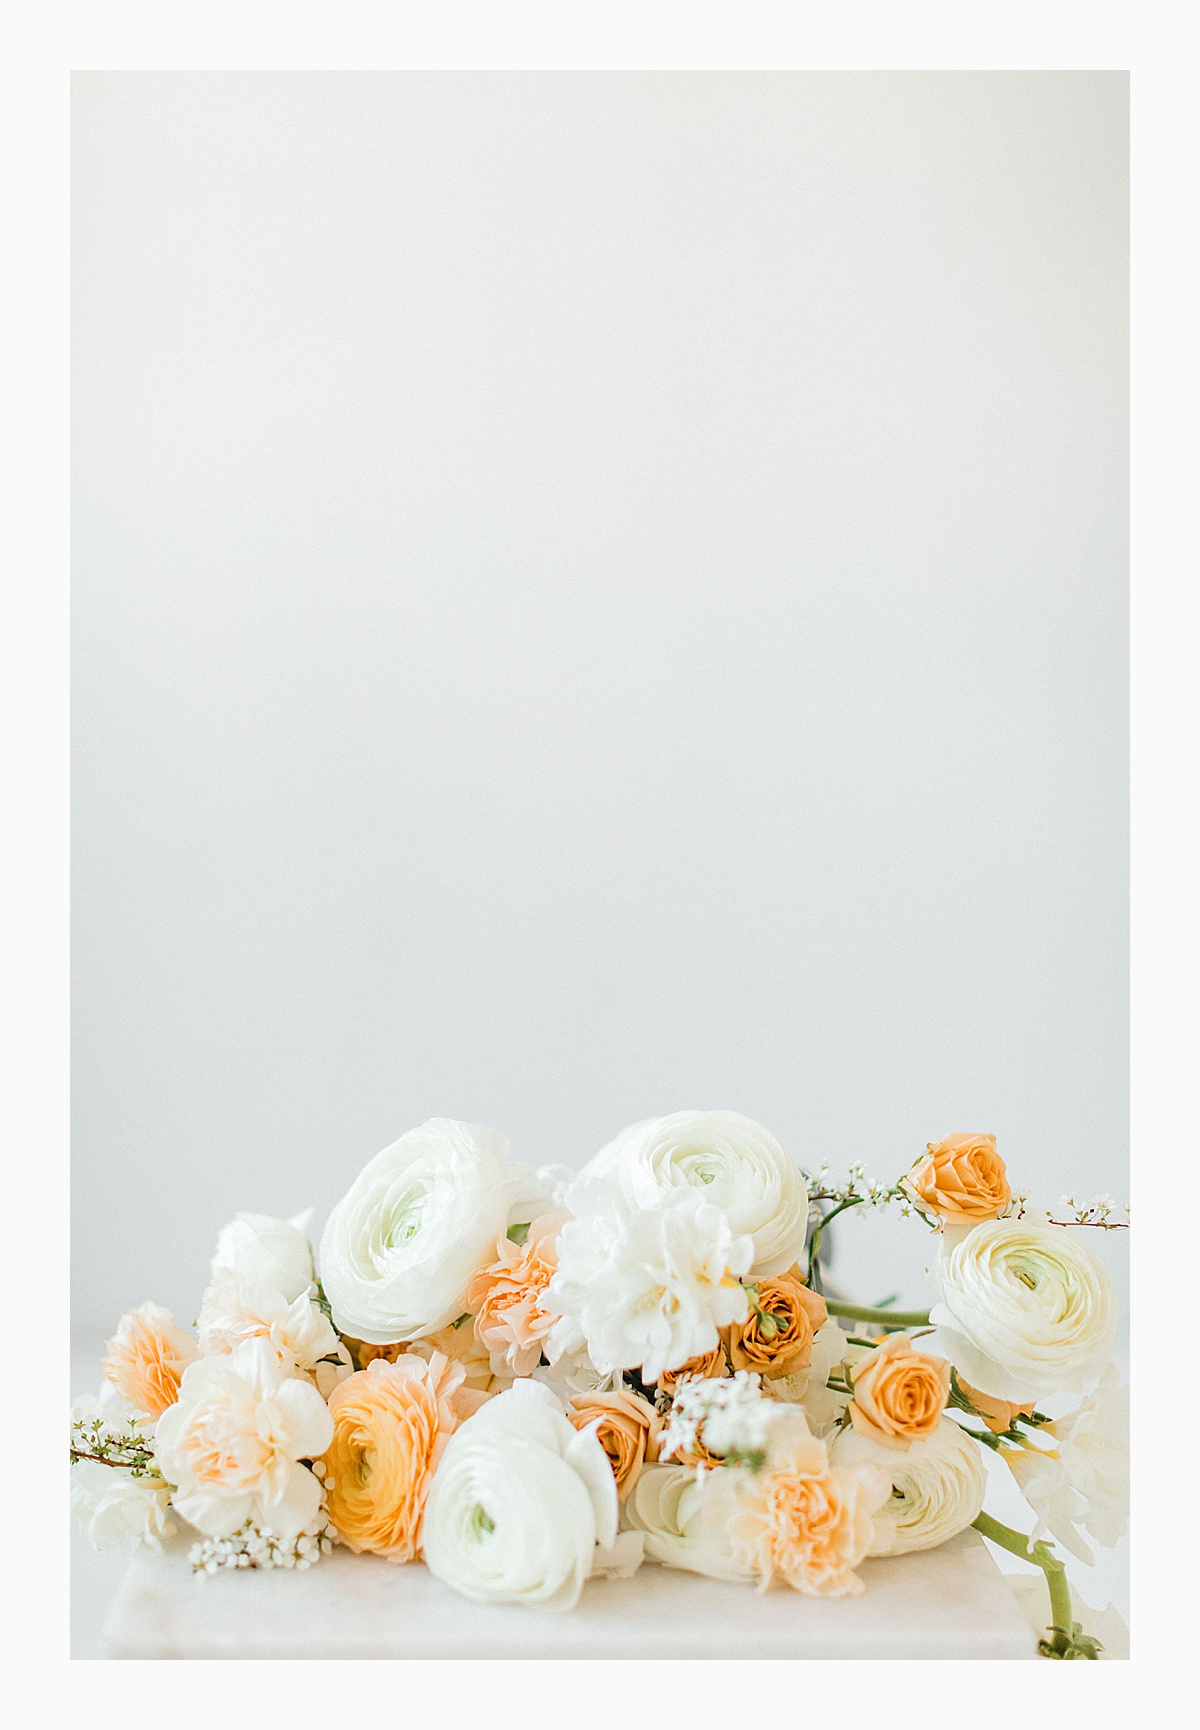 The Bemis Building in downtown Seattle is one of my favorite places to use for photo shoots!  This styled bridal shoot with touches of peach and white was dreamy.  #emmarosecompany #kindredpresets #seattlebride_0005.jpg